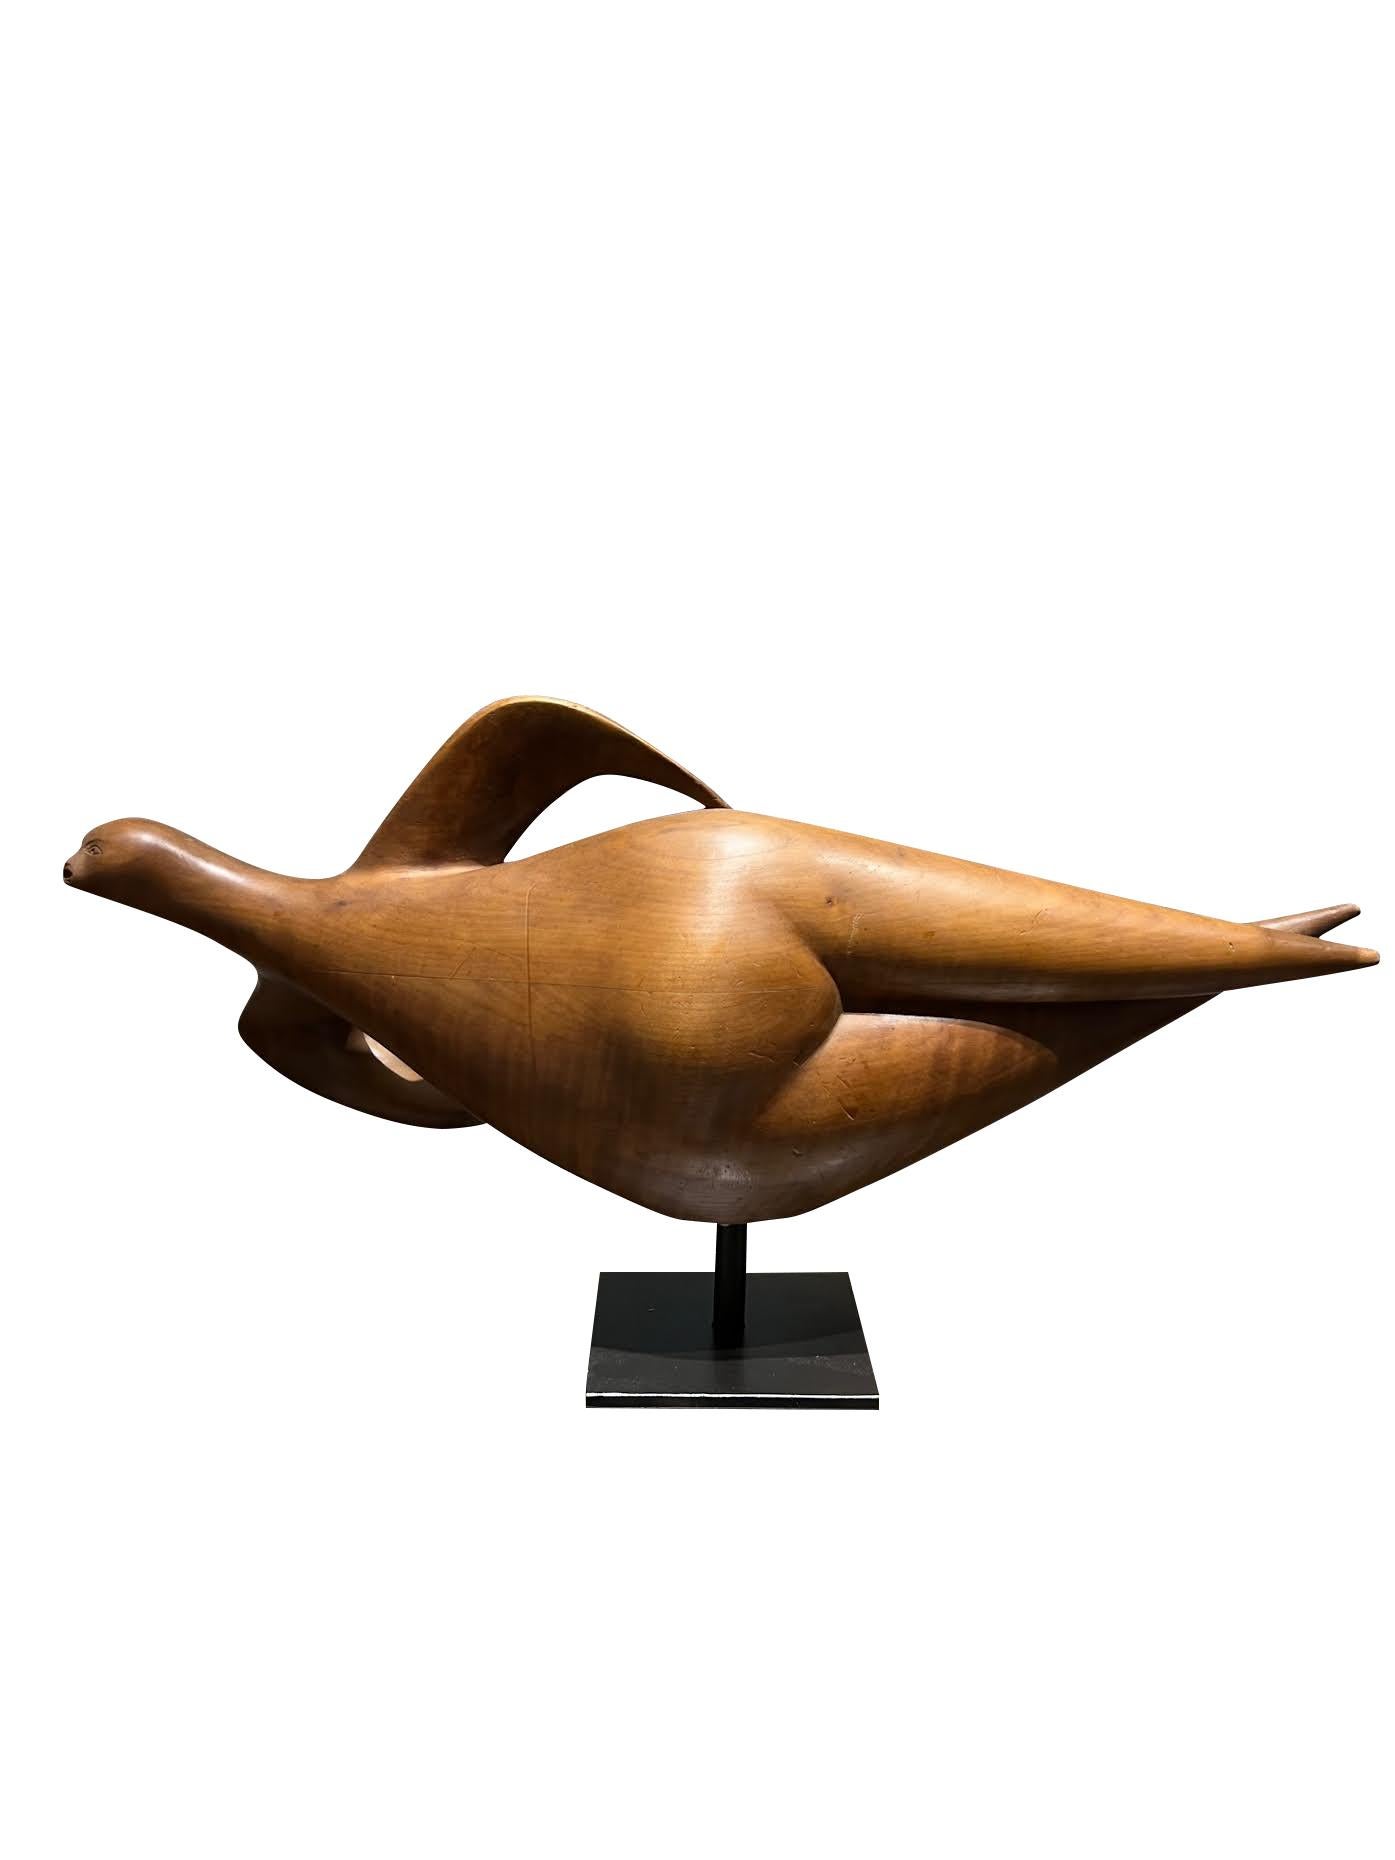 1960's French wooden abstract sculpture of a female form.
